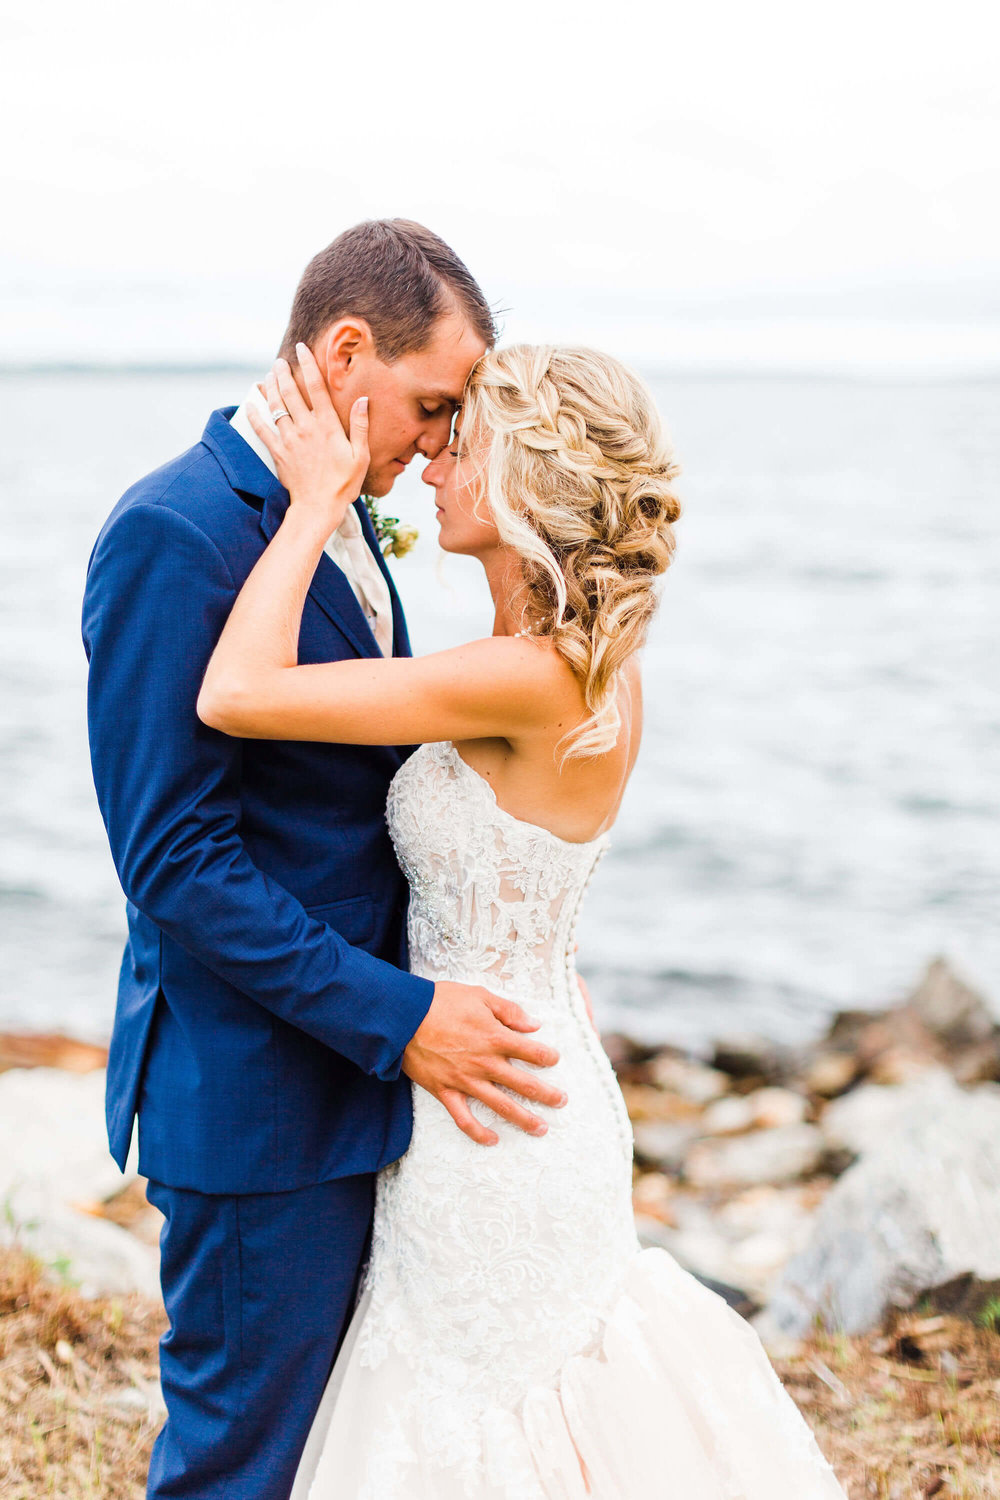 A Nautical Themed Wedding on Long Island — Pinch Me Planning - Maine ...